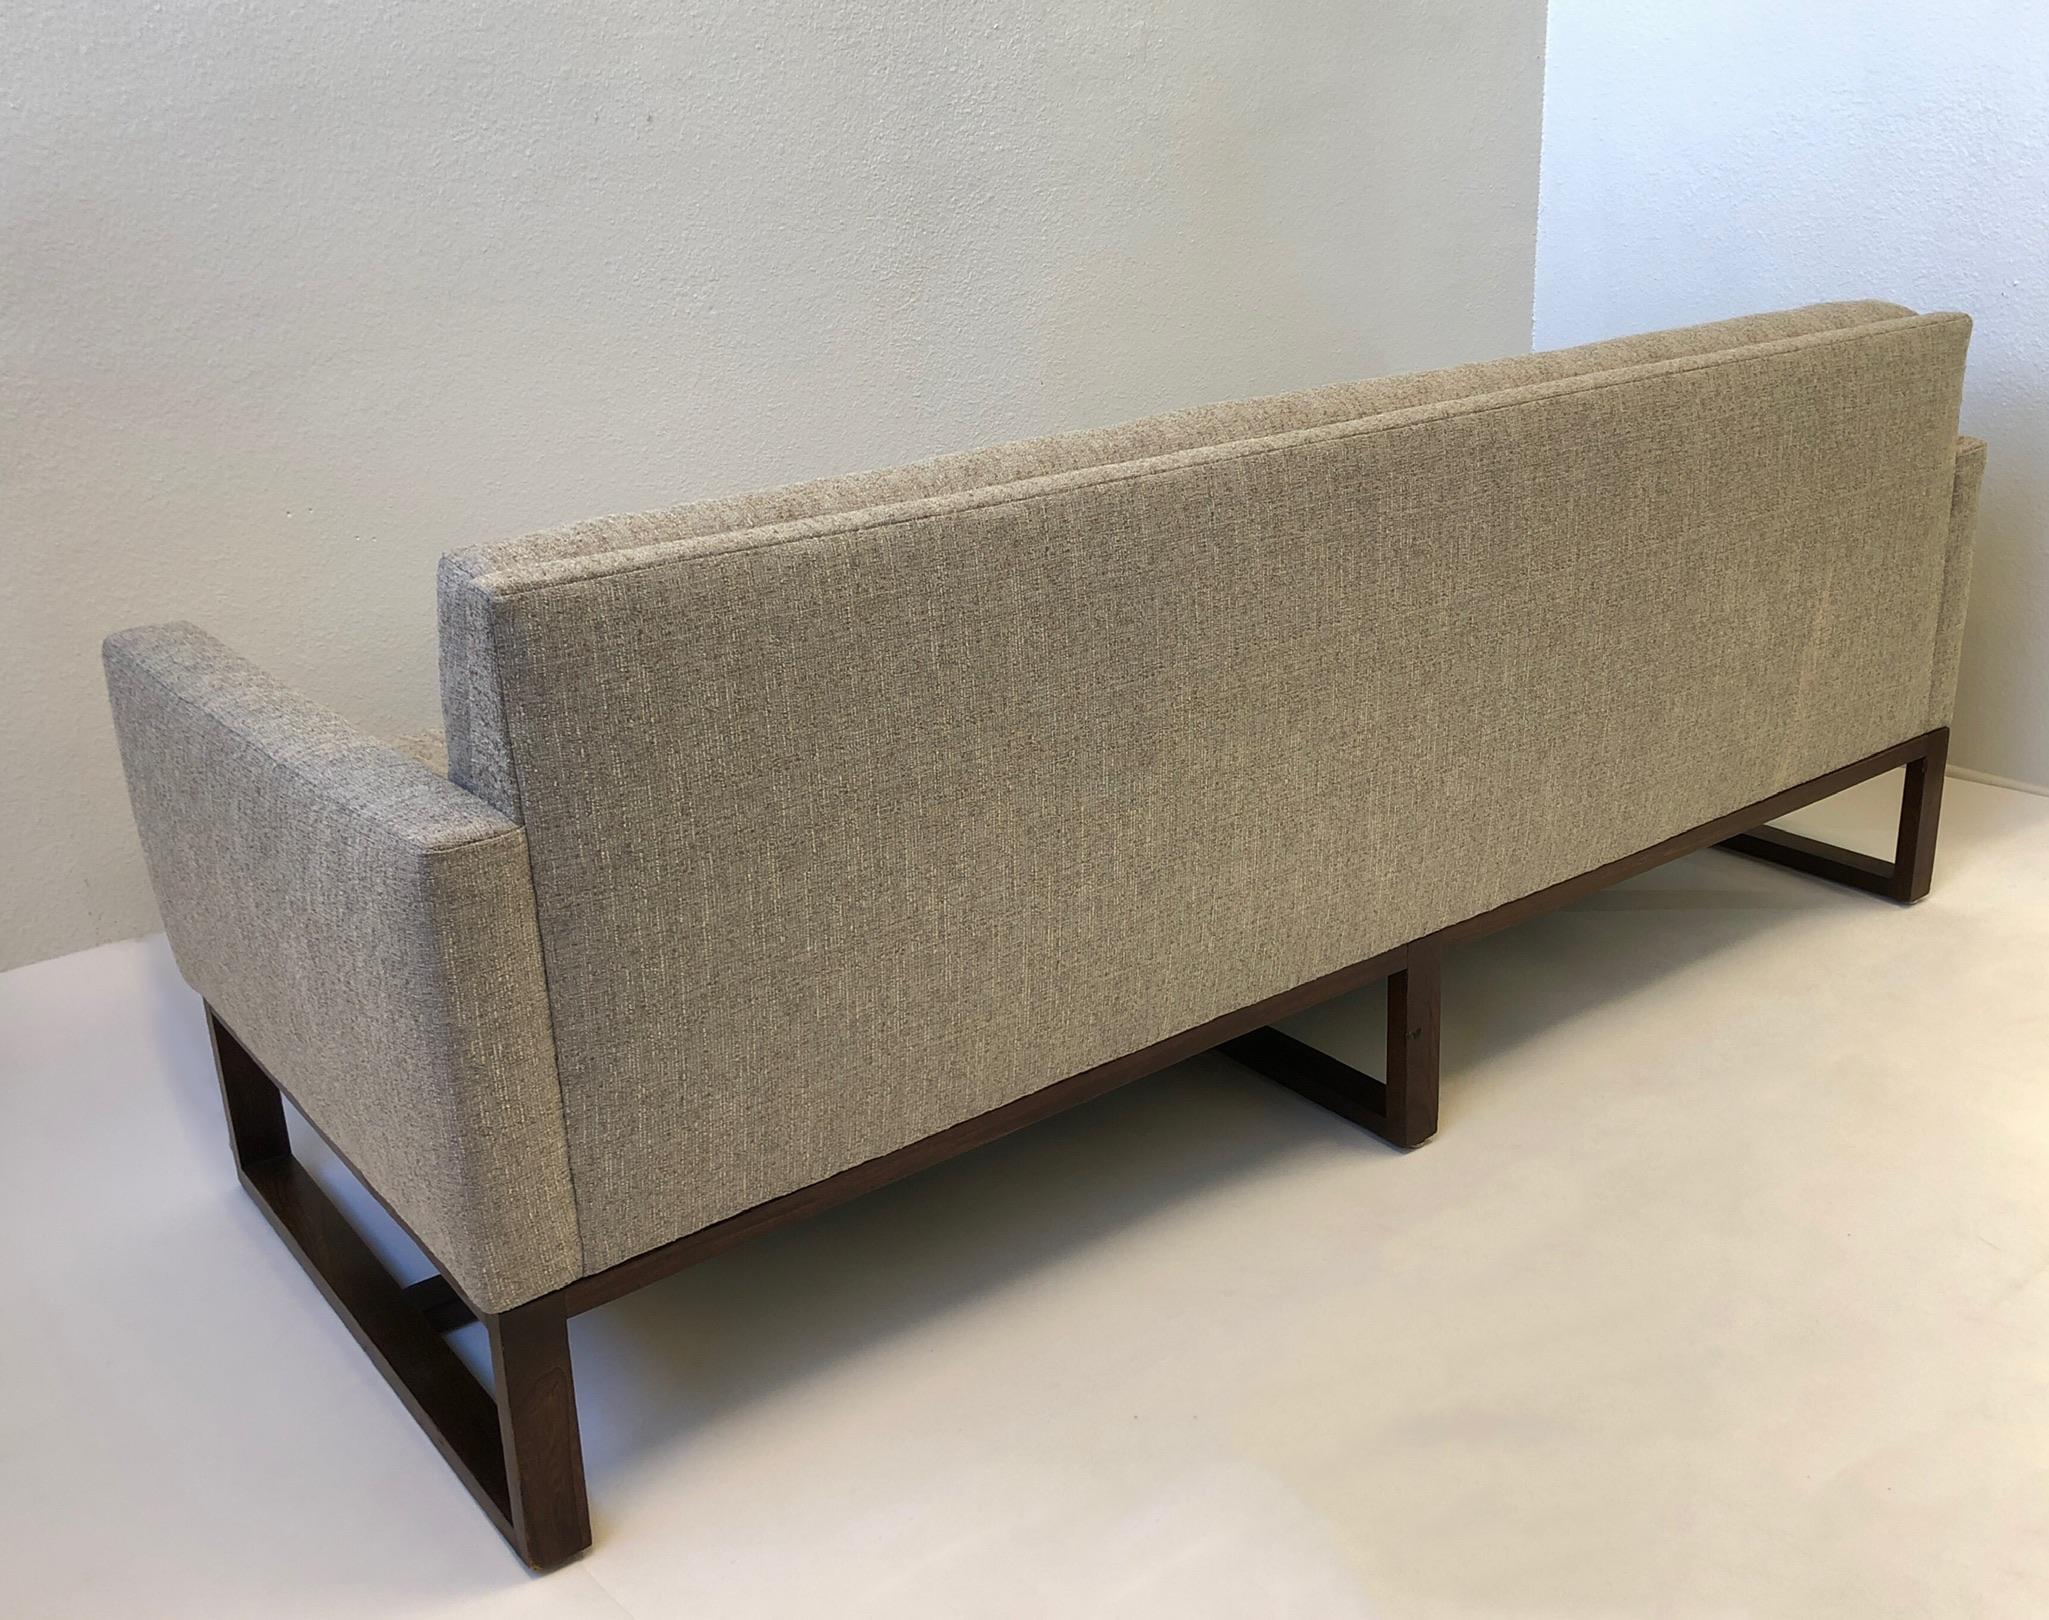 Walnut and Fabric Sofa In Good Condition For Sale In Palm Springs, CA